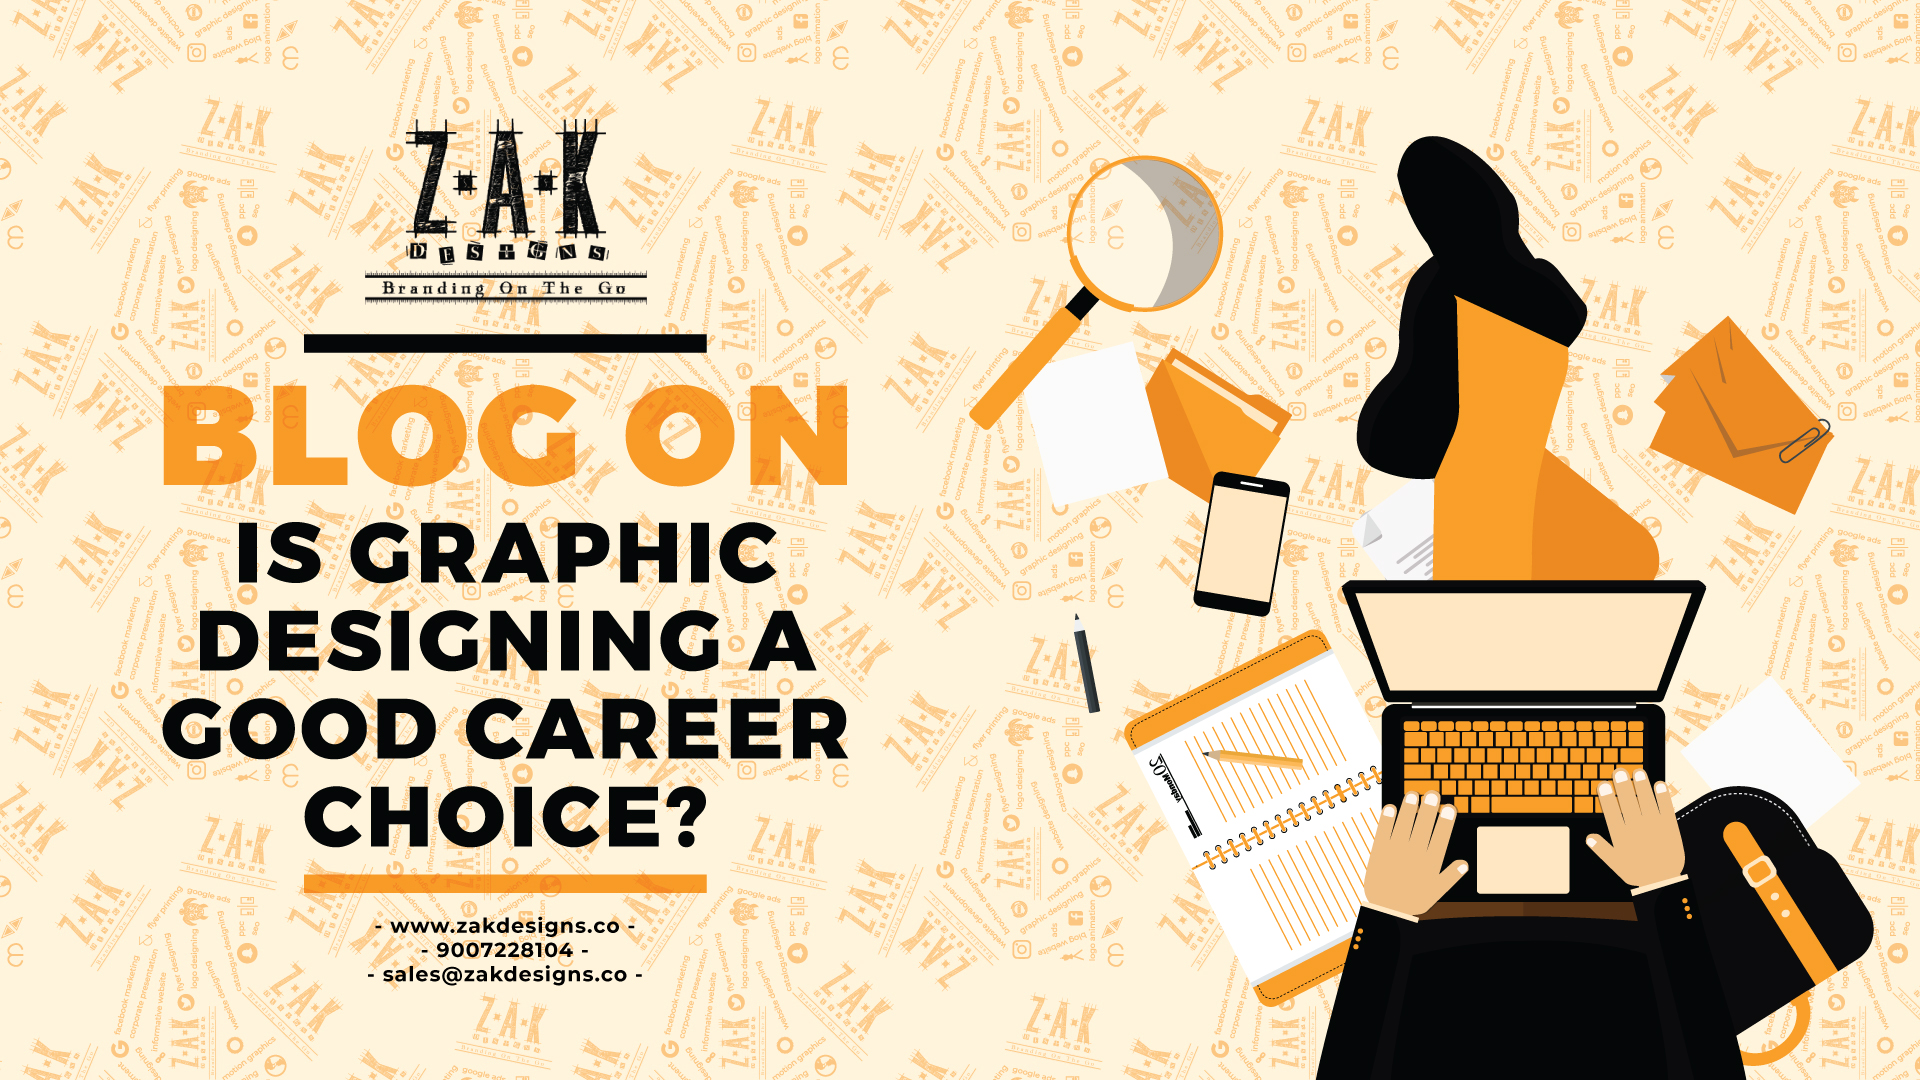 blog on is graphic designing a good career choice by Zain Ahmed Kamal